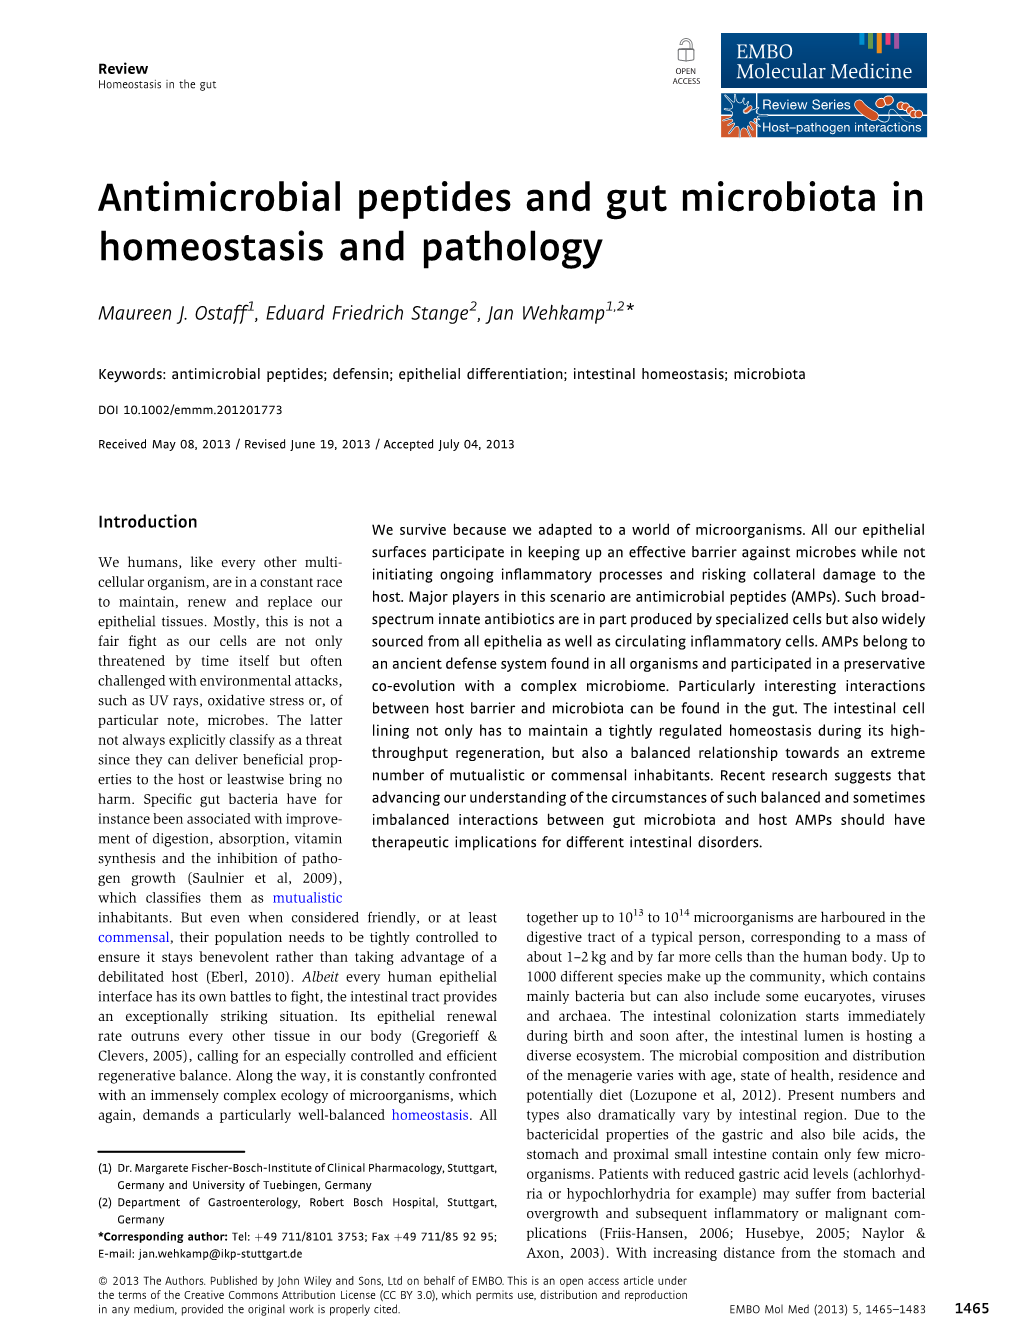 Antimicrobial Peptides and Gut Microbiota in Homeostasis and Pathology